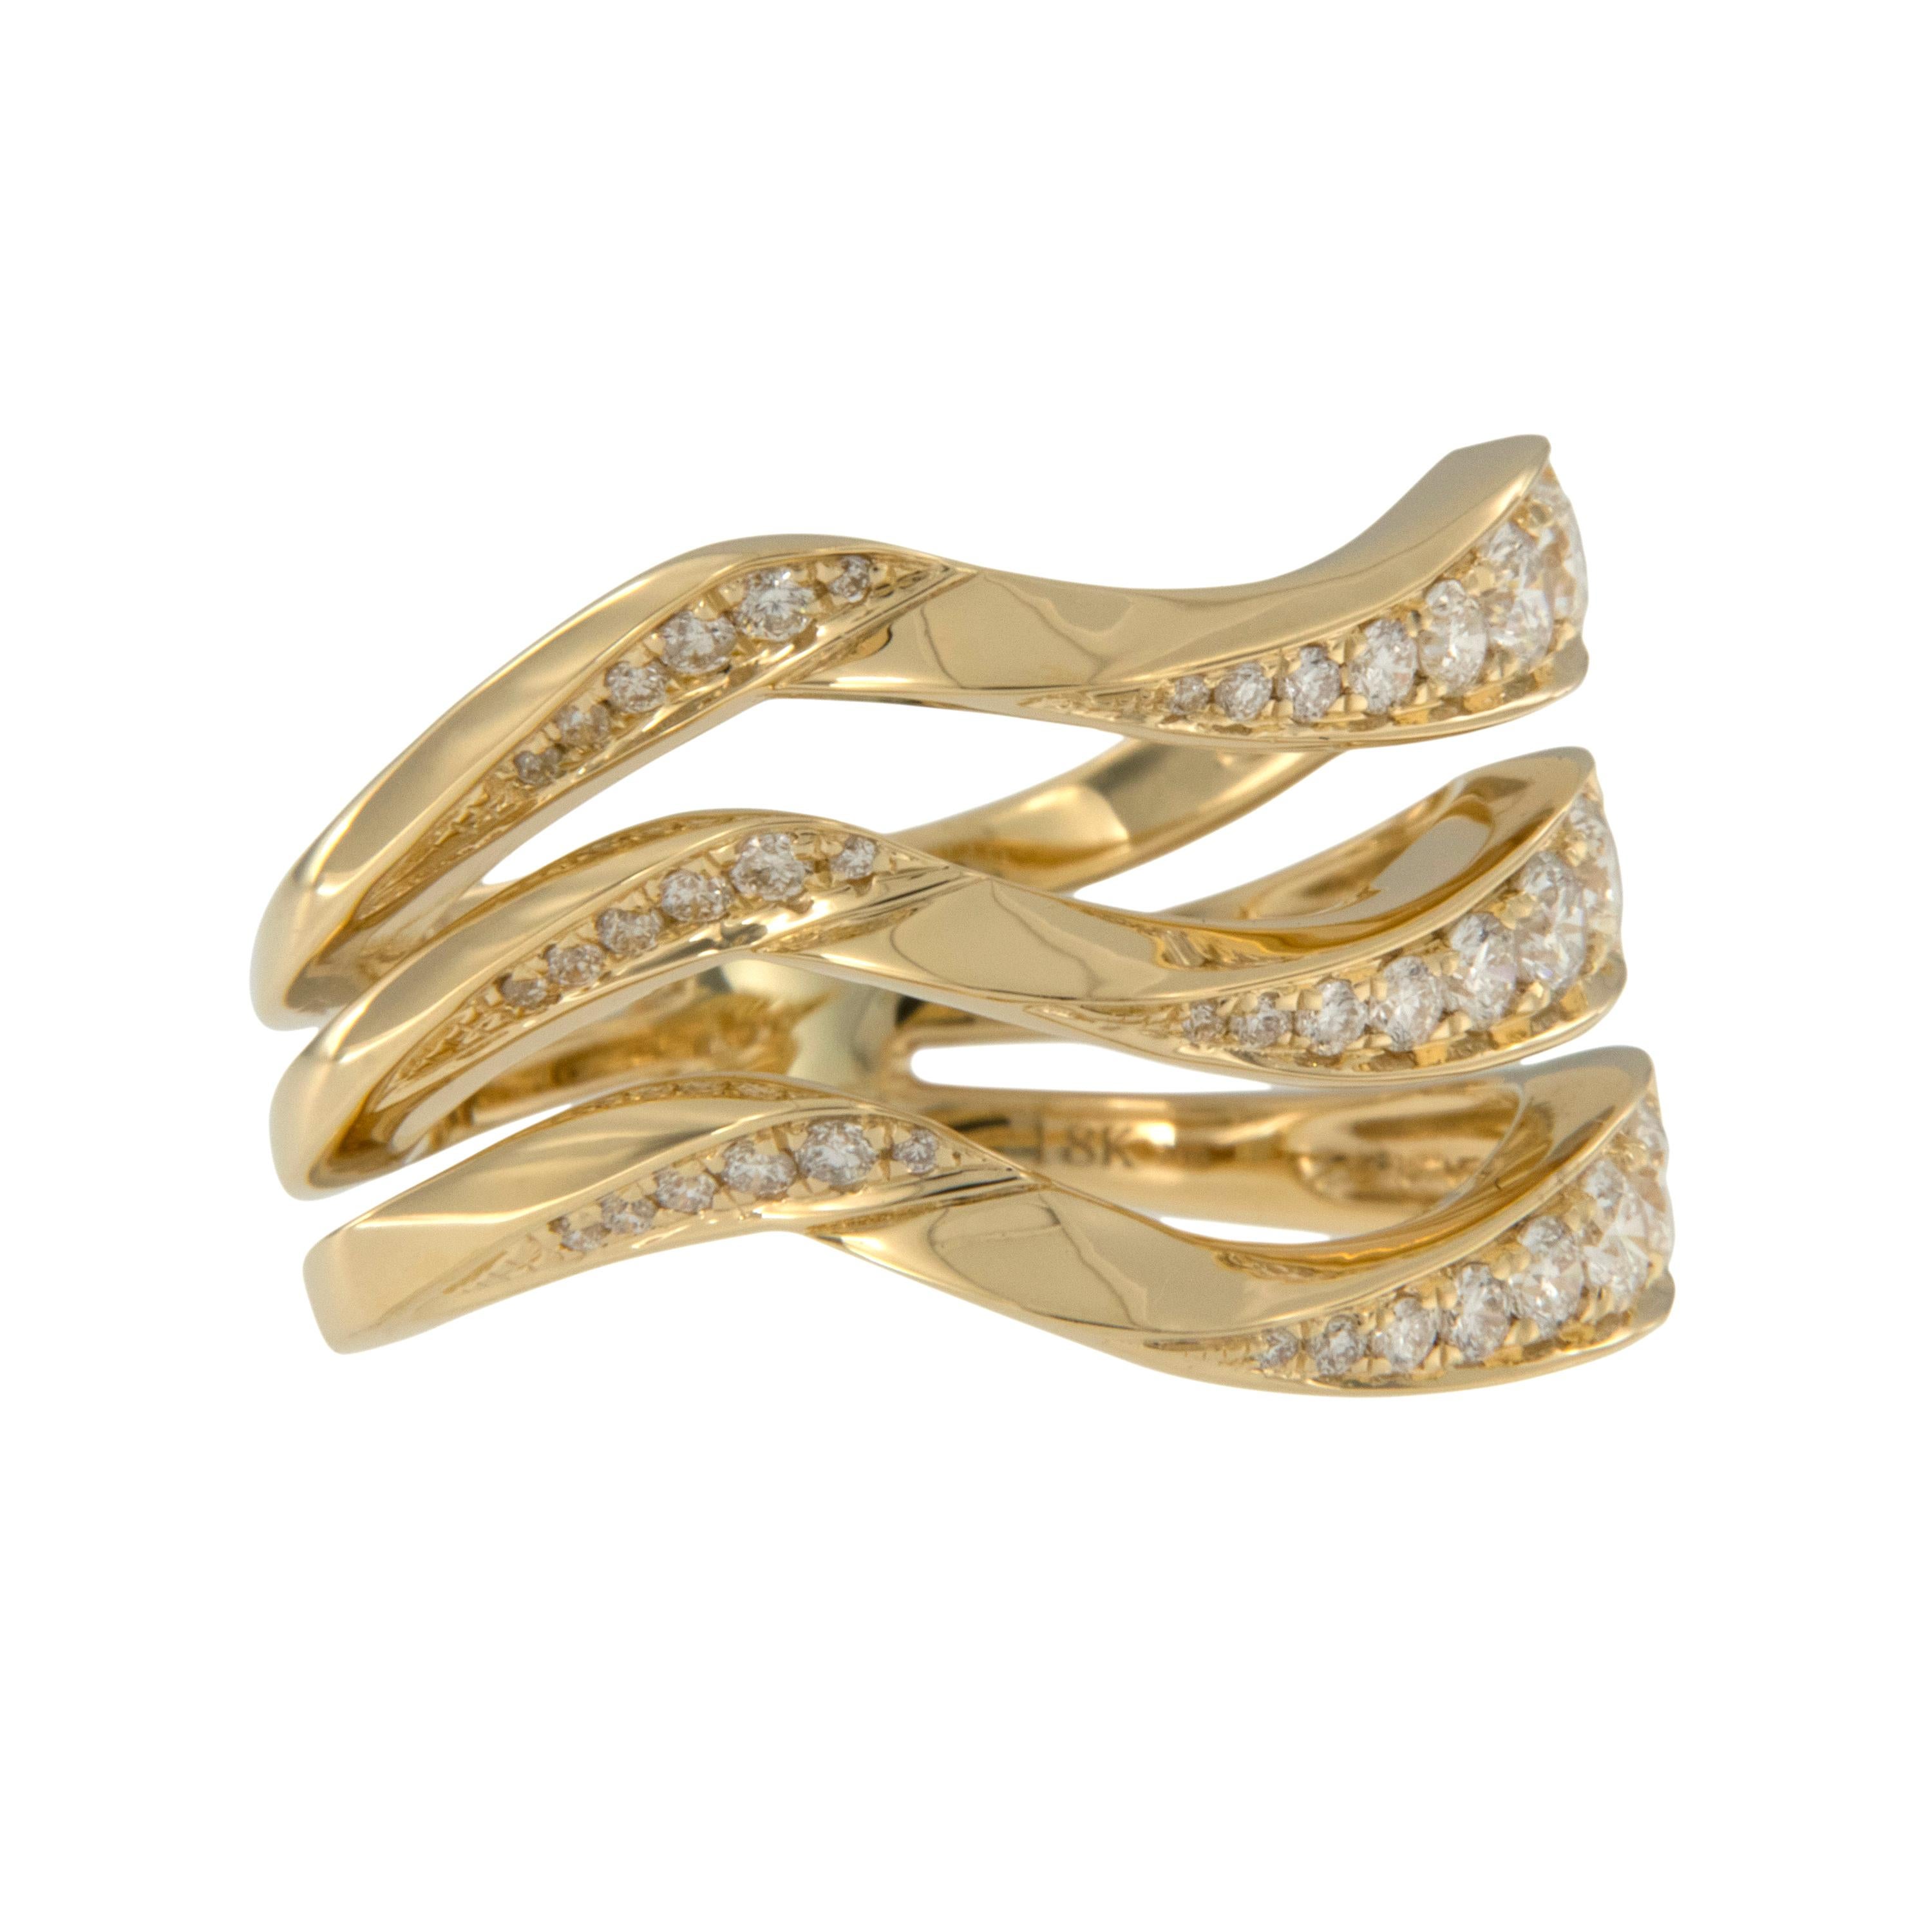 This fun & catching fashion ring with contemporary twist is a must have! Made from royal 18 karat yellow gold with 0.62 Cttw fine diamonds set on a bias shimmers in a size 6, but can be sized. Makes a perfect gift! Complimentary signature wrapping &